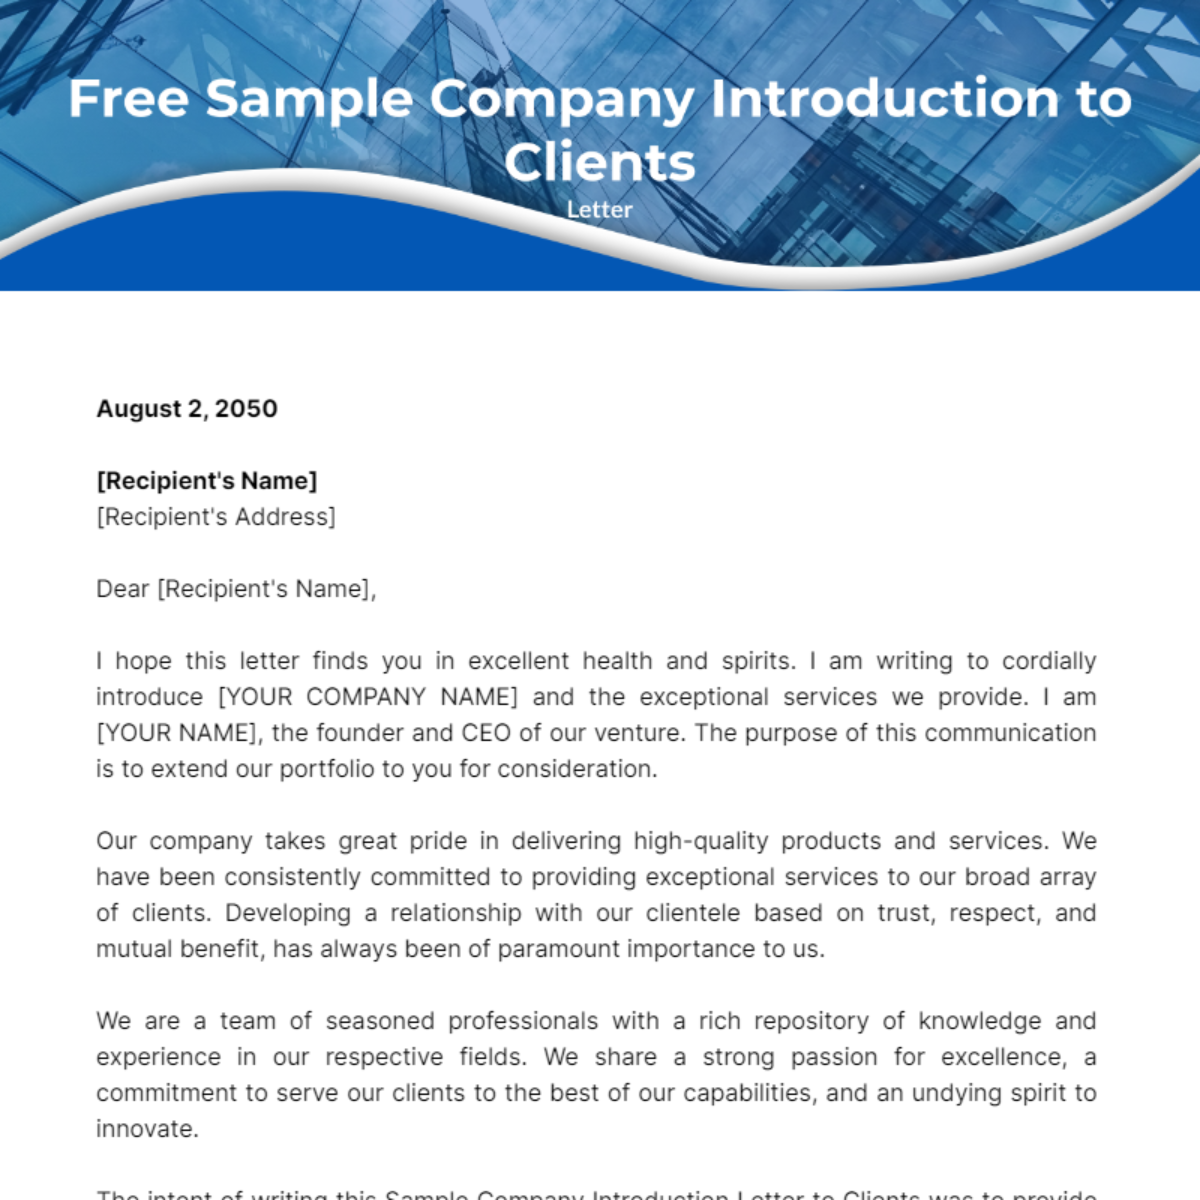 Sample Company Introduction Letter to Clients Template